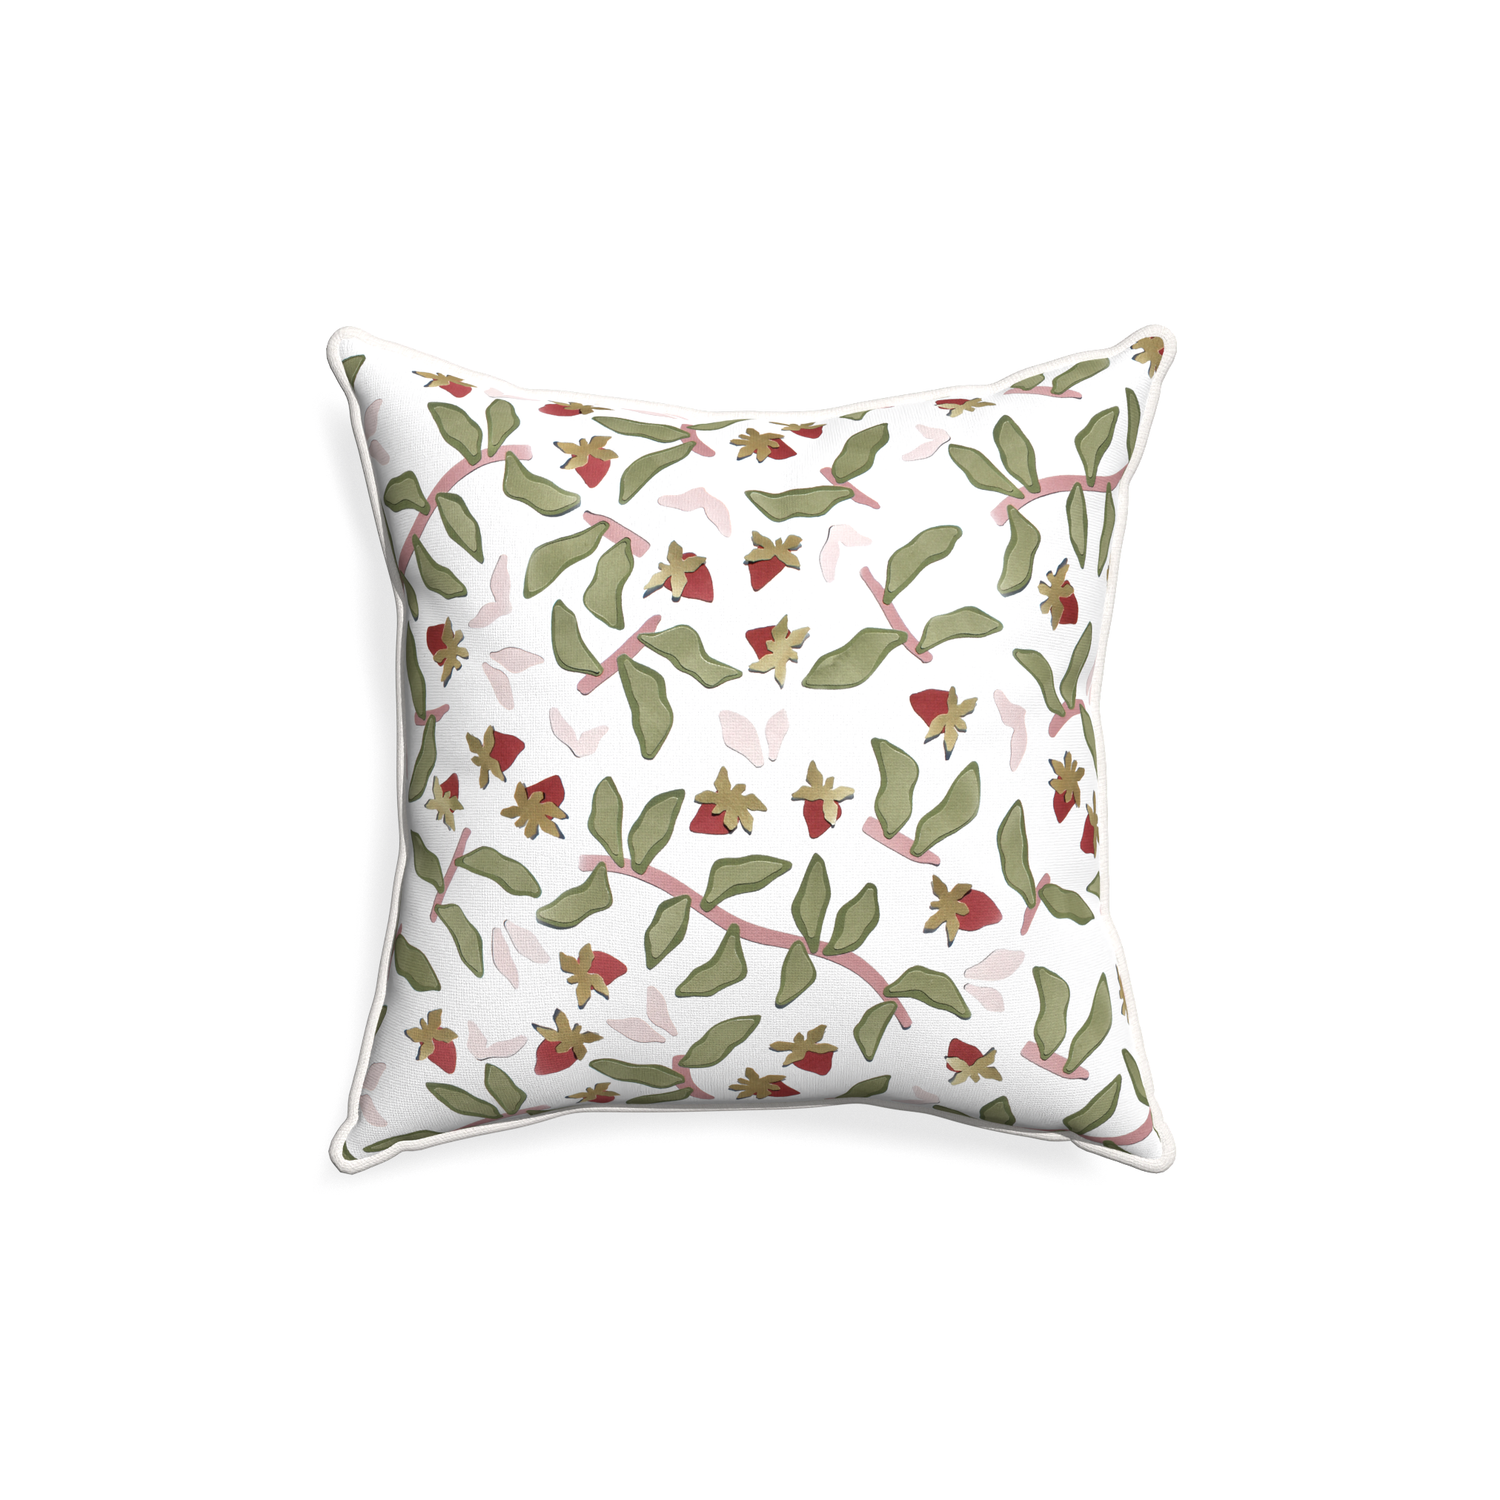 18-square nellie custom strawberry & botanicalpillow with snow piping on white background